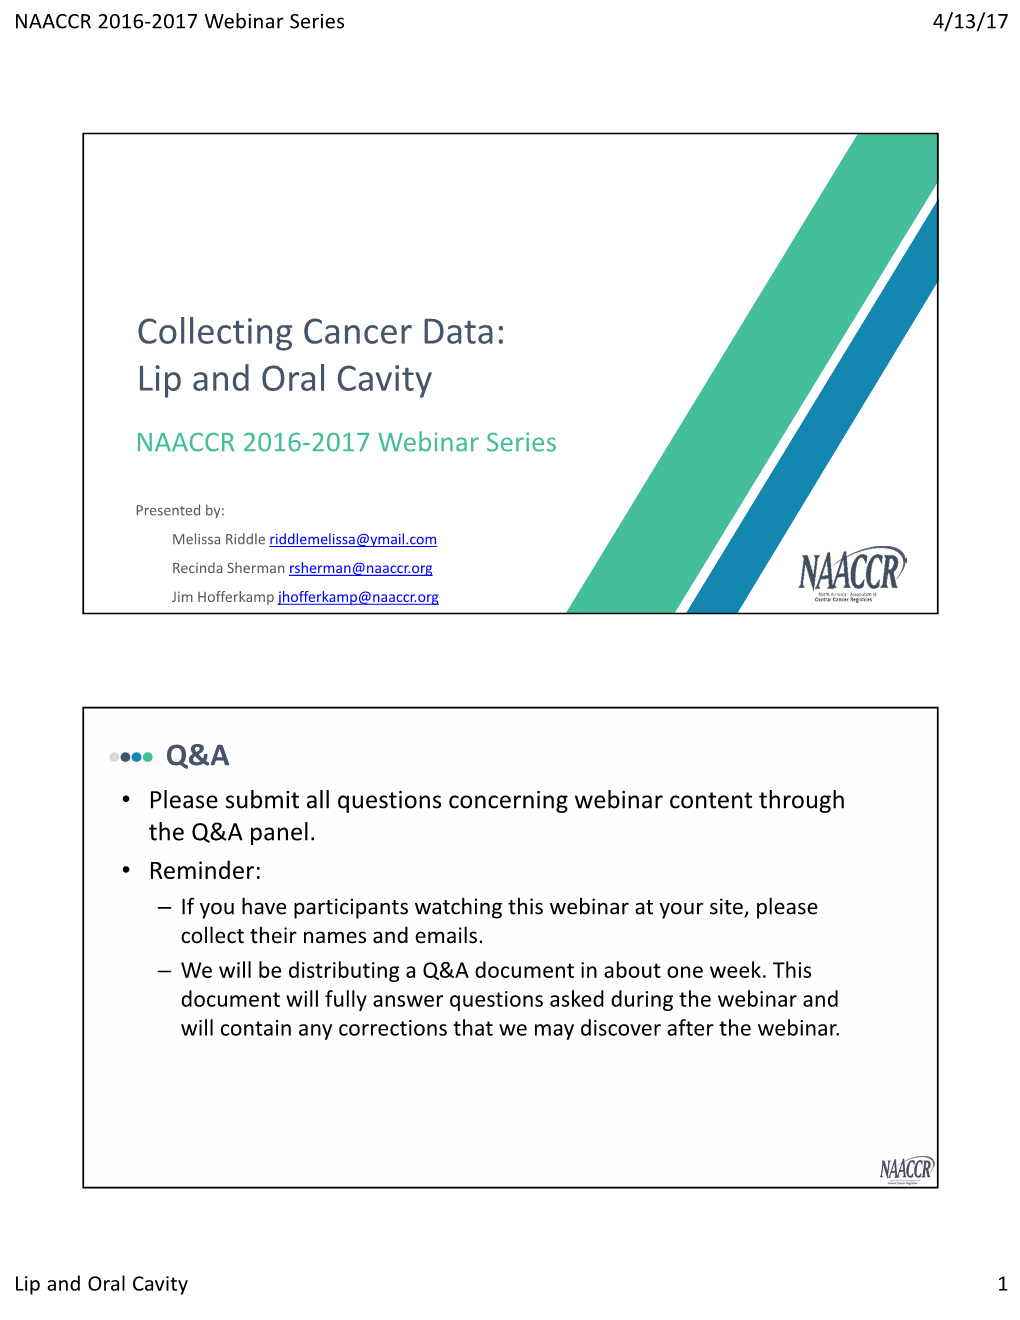 Collecting Cancer Data: Lip and Oral Cavity